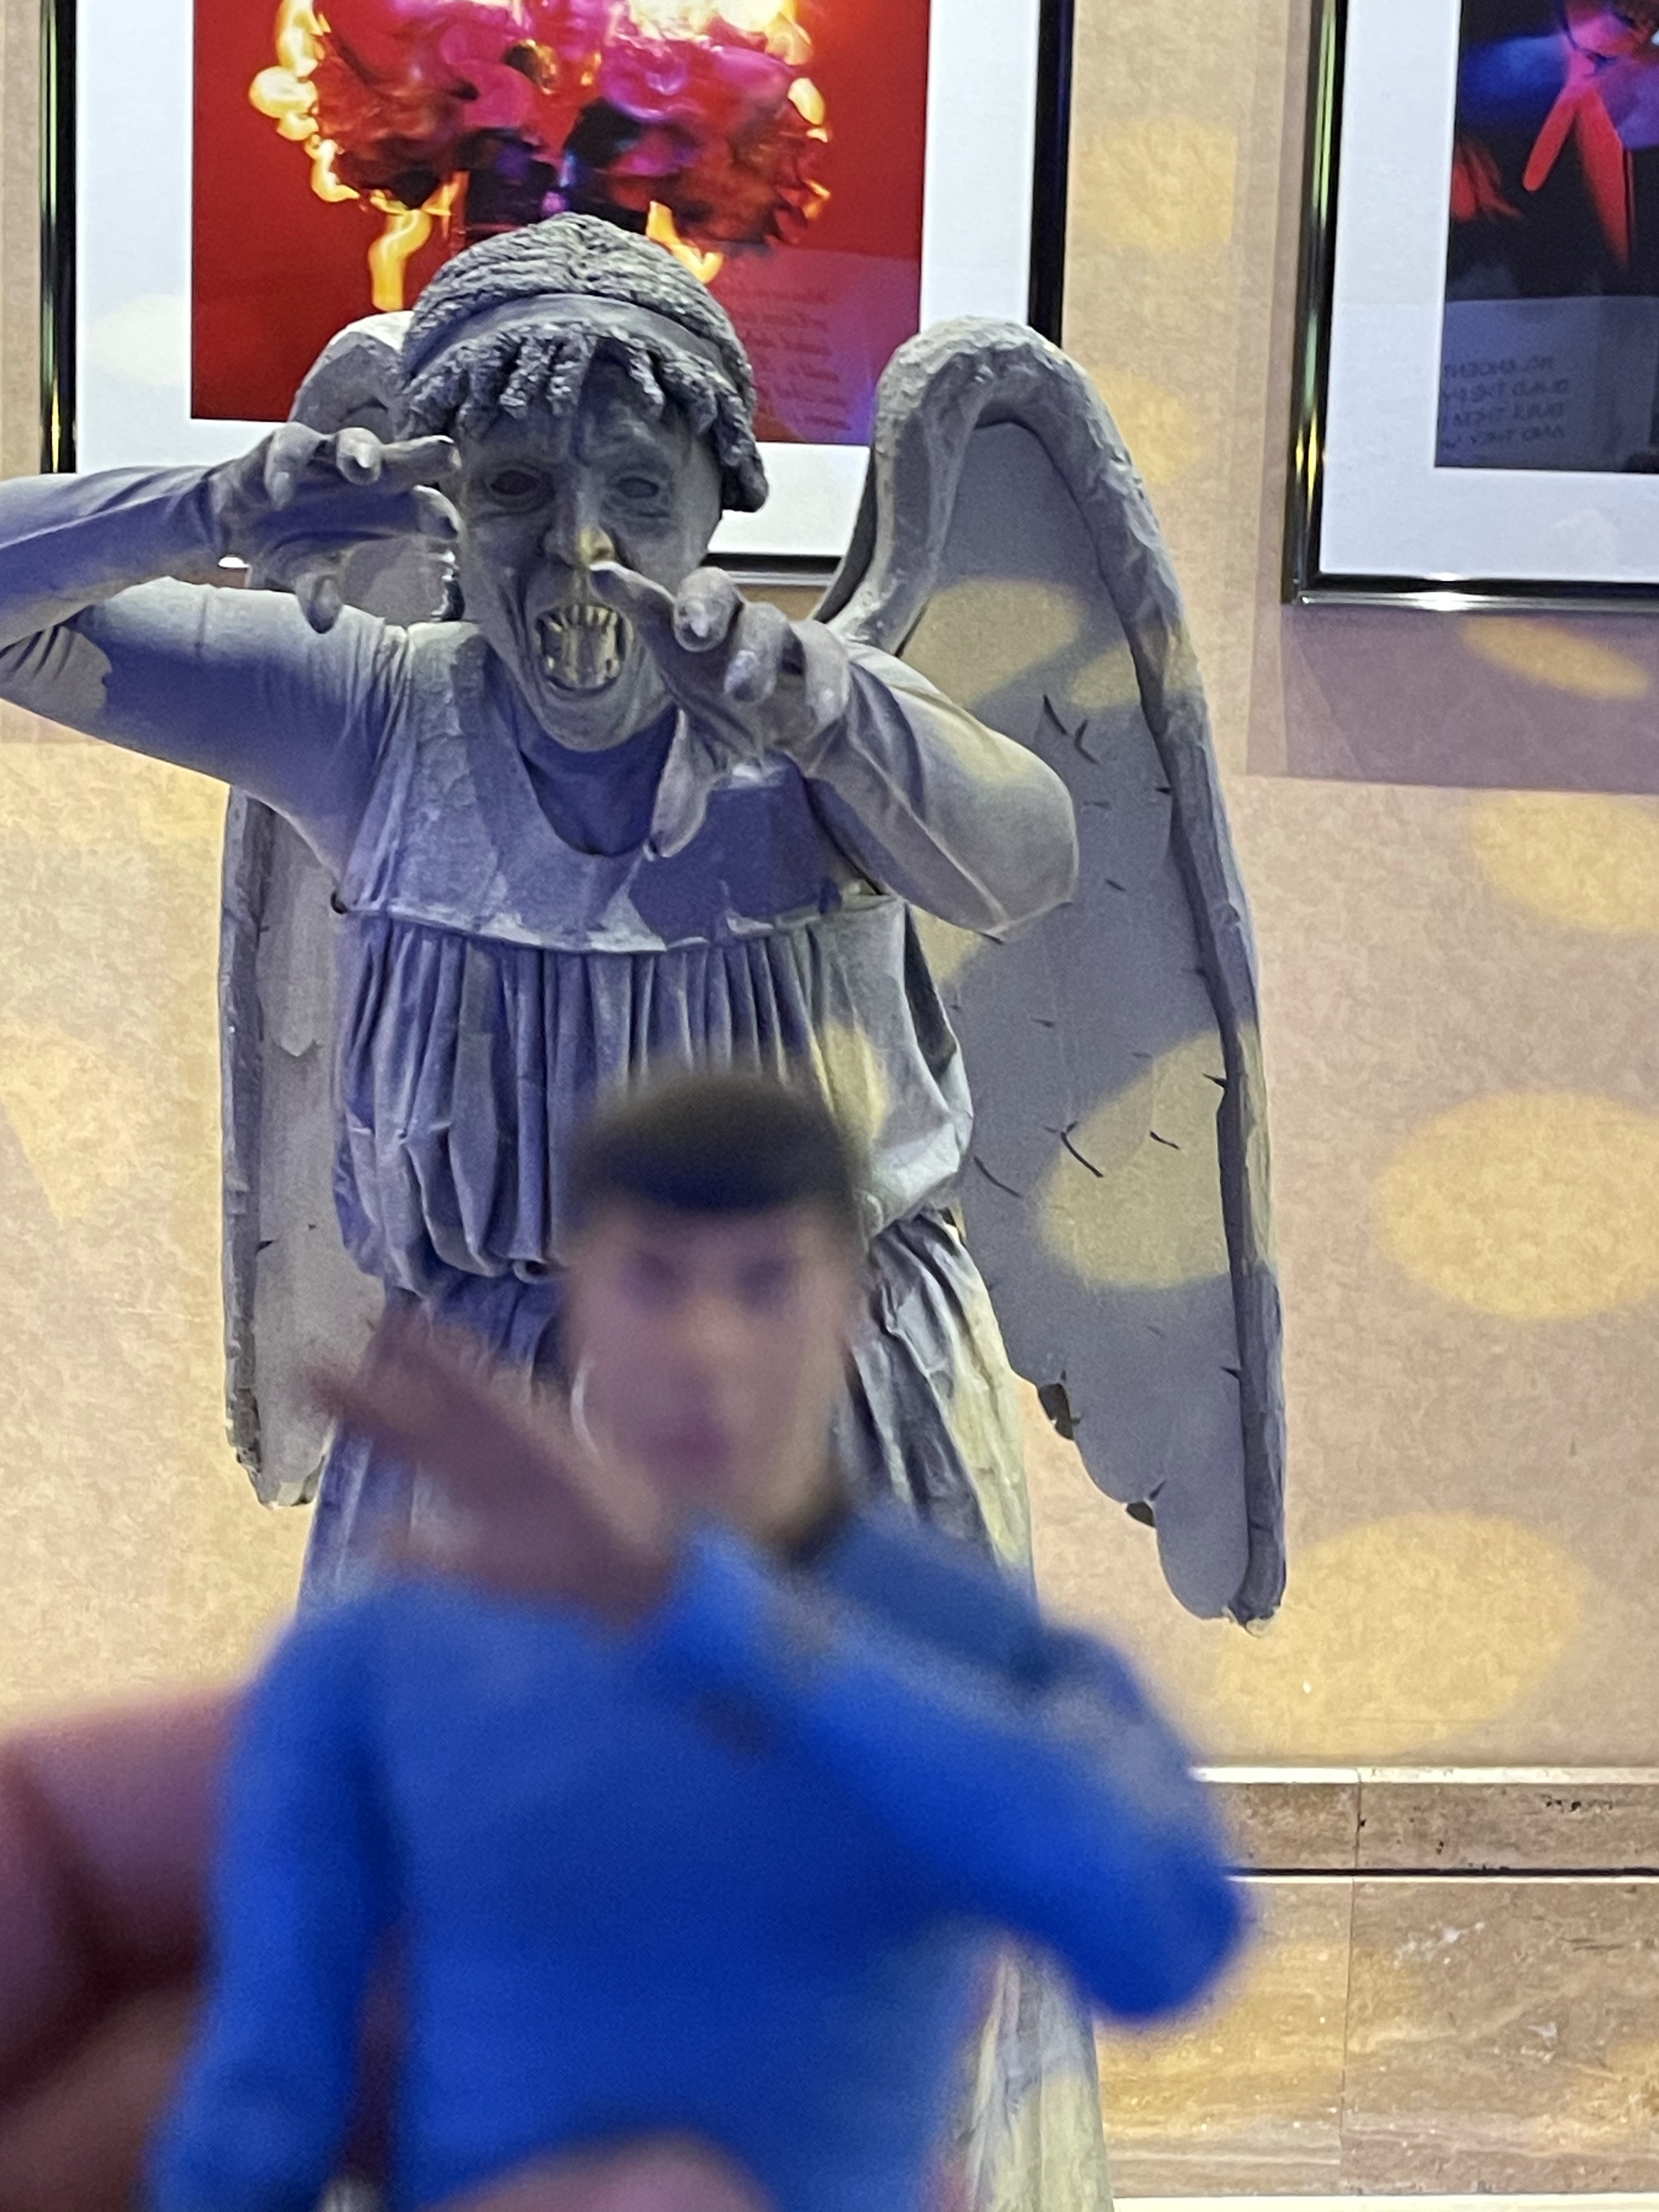 Spock Action Figure running away from Weeping Angel Cosplay